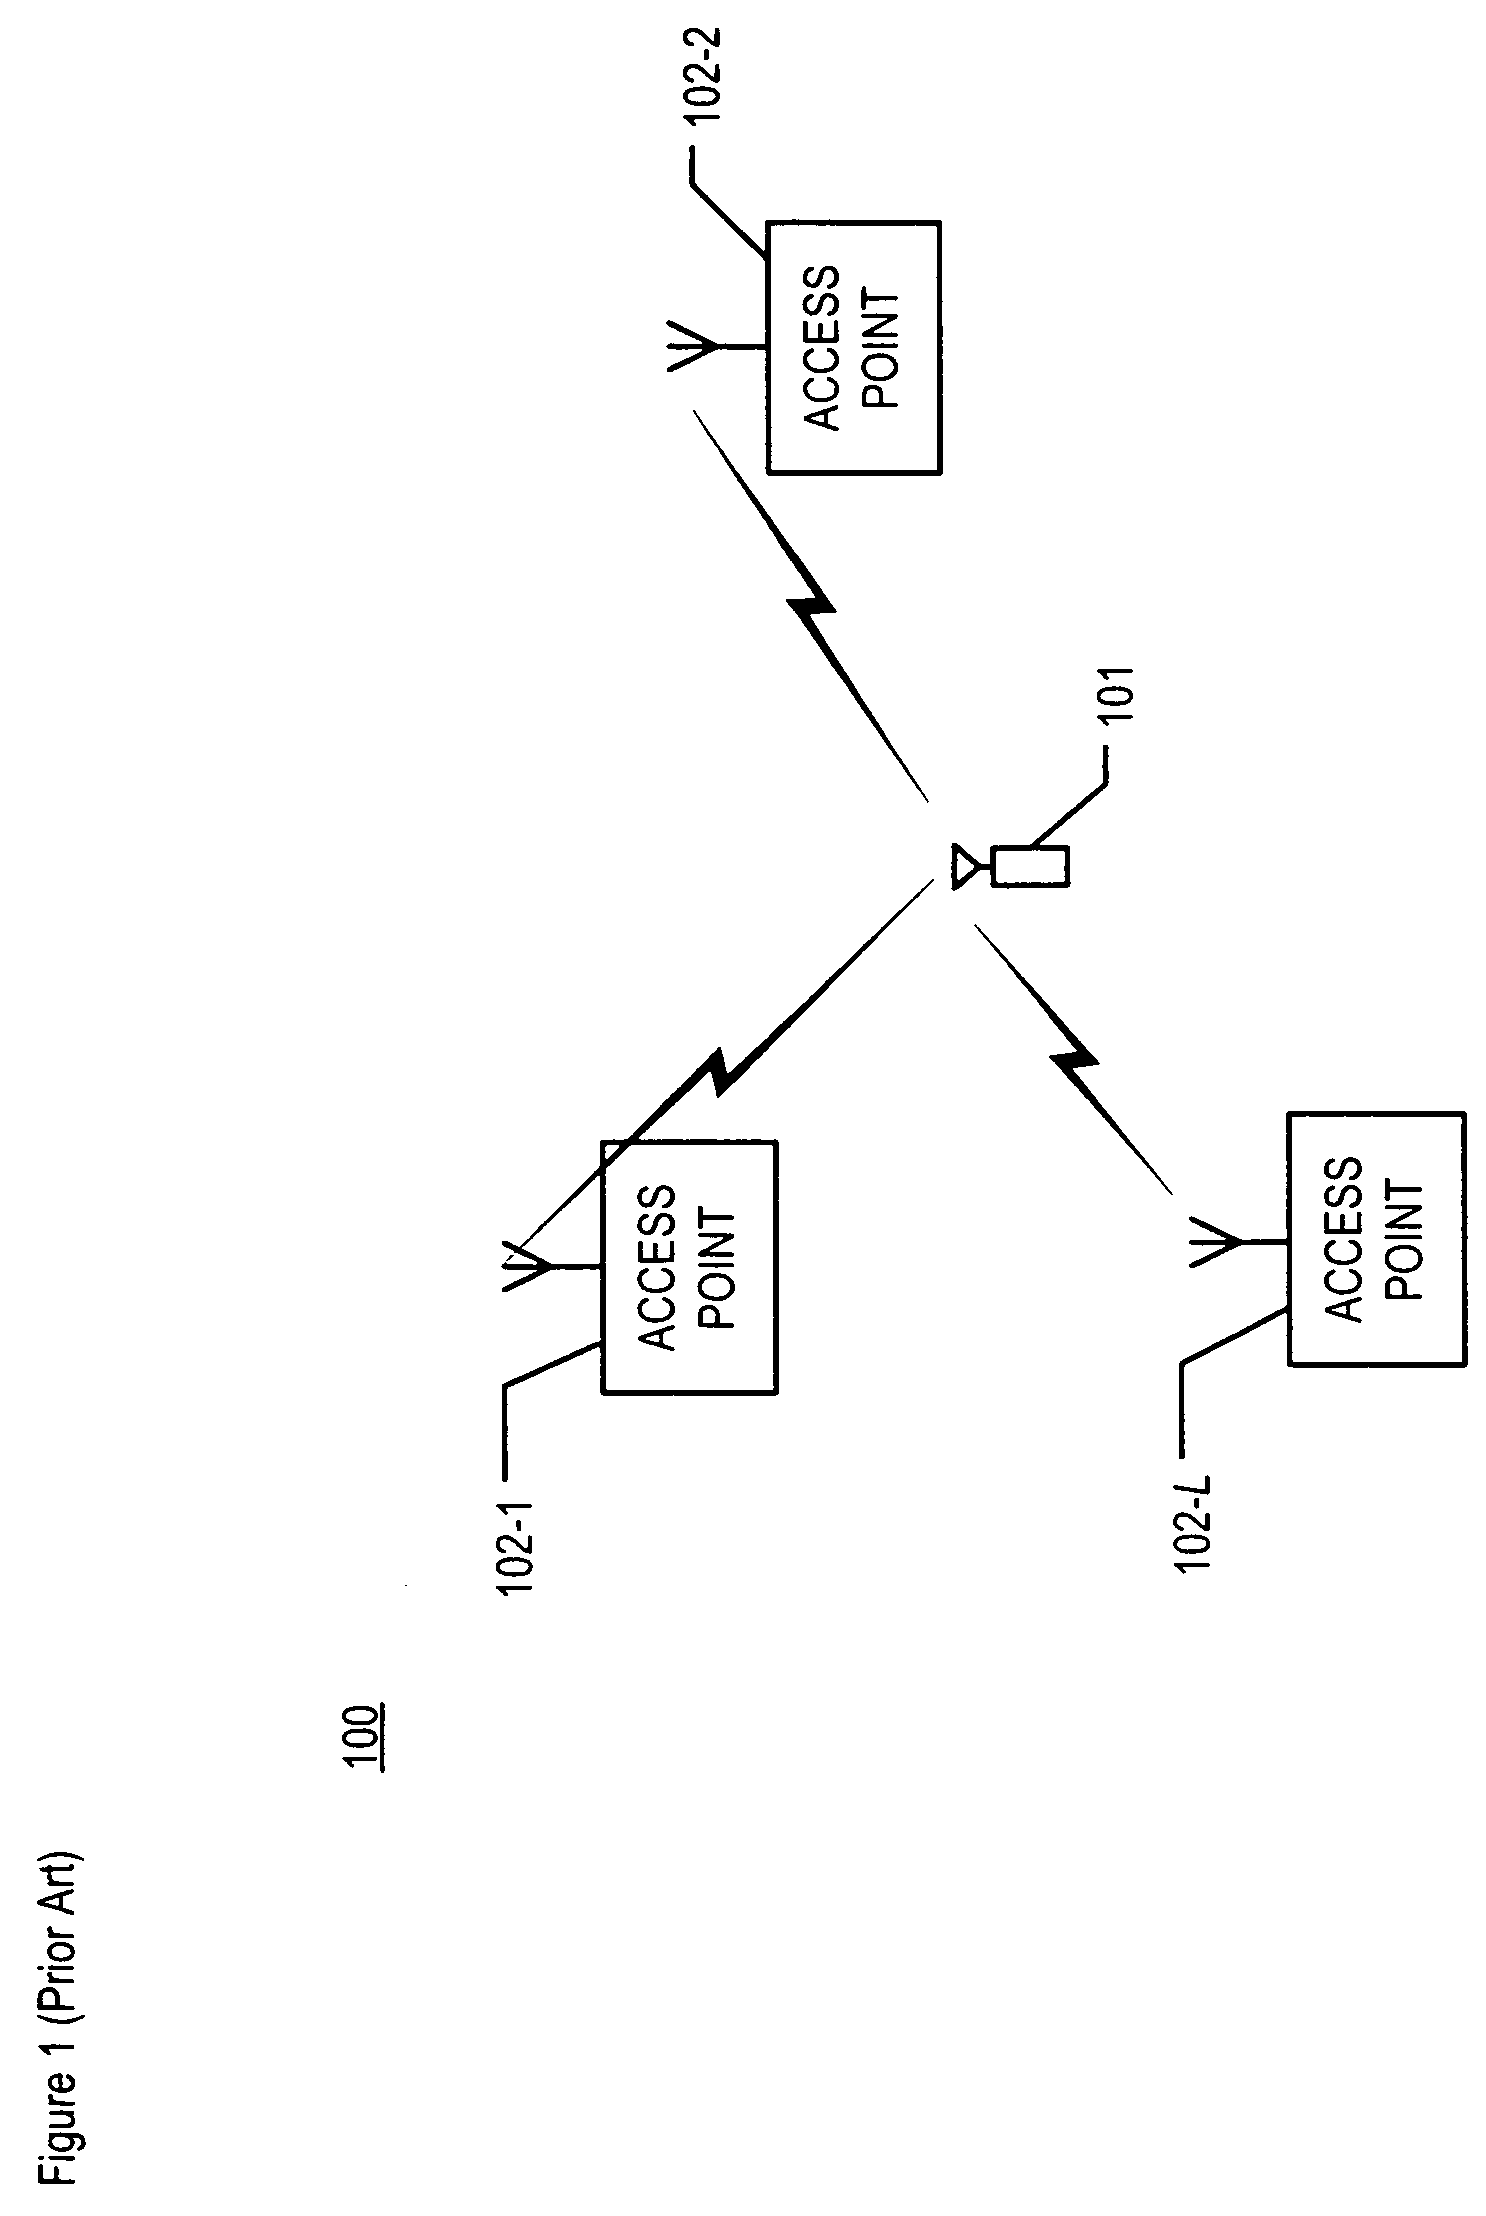 Location estimation of wireless terminals in a multi-story environment